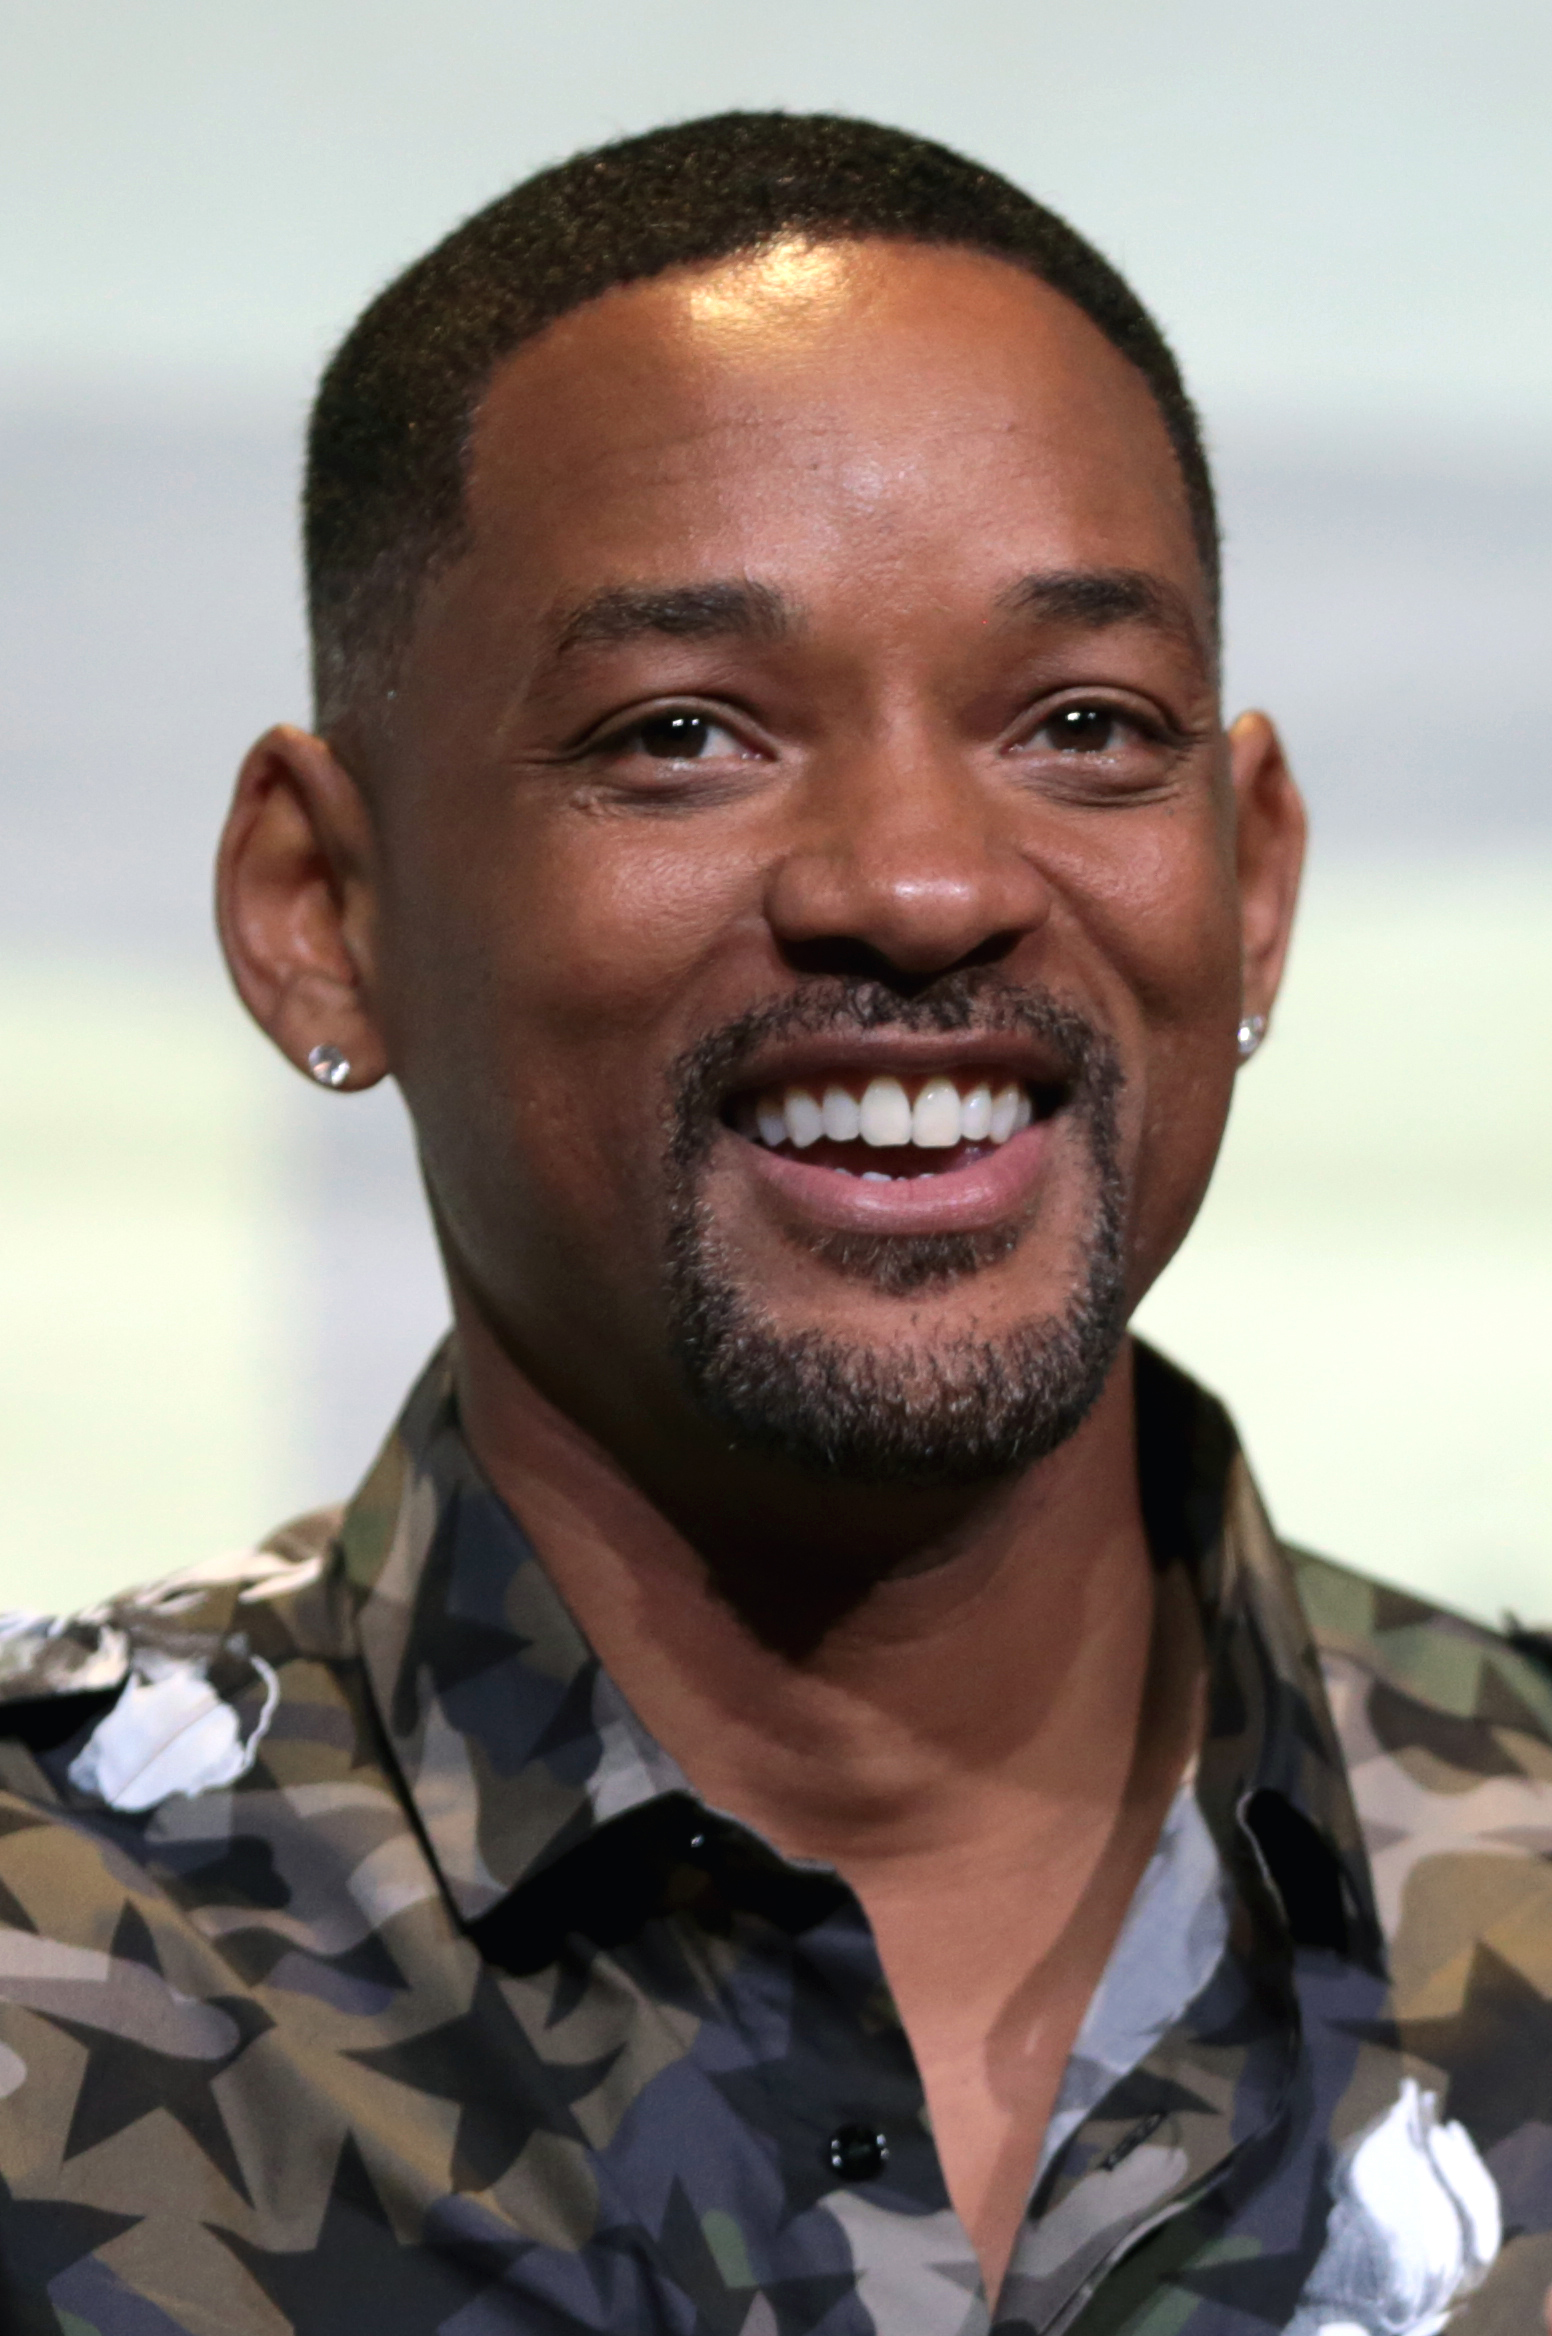 Will Smith by Gage Skidmore